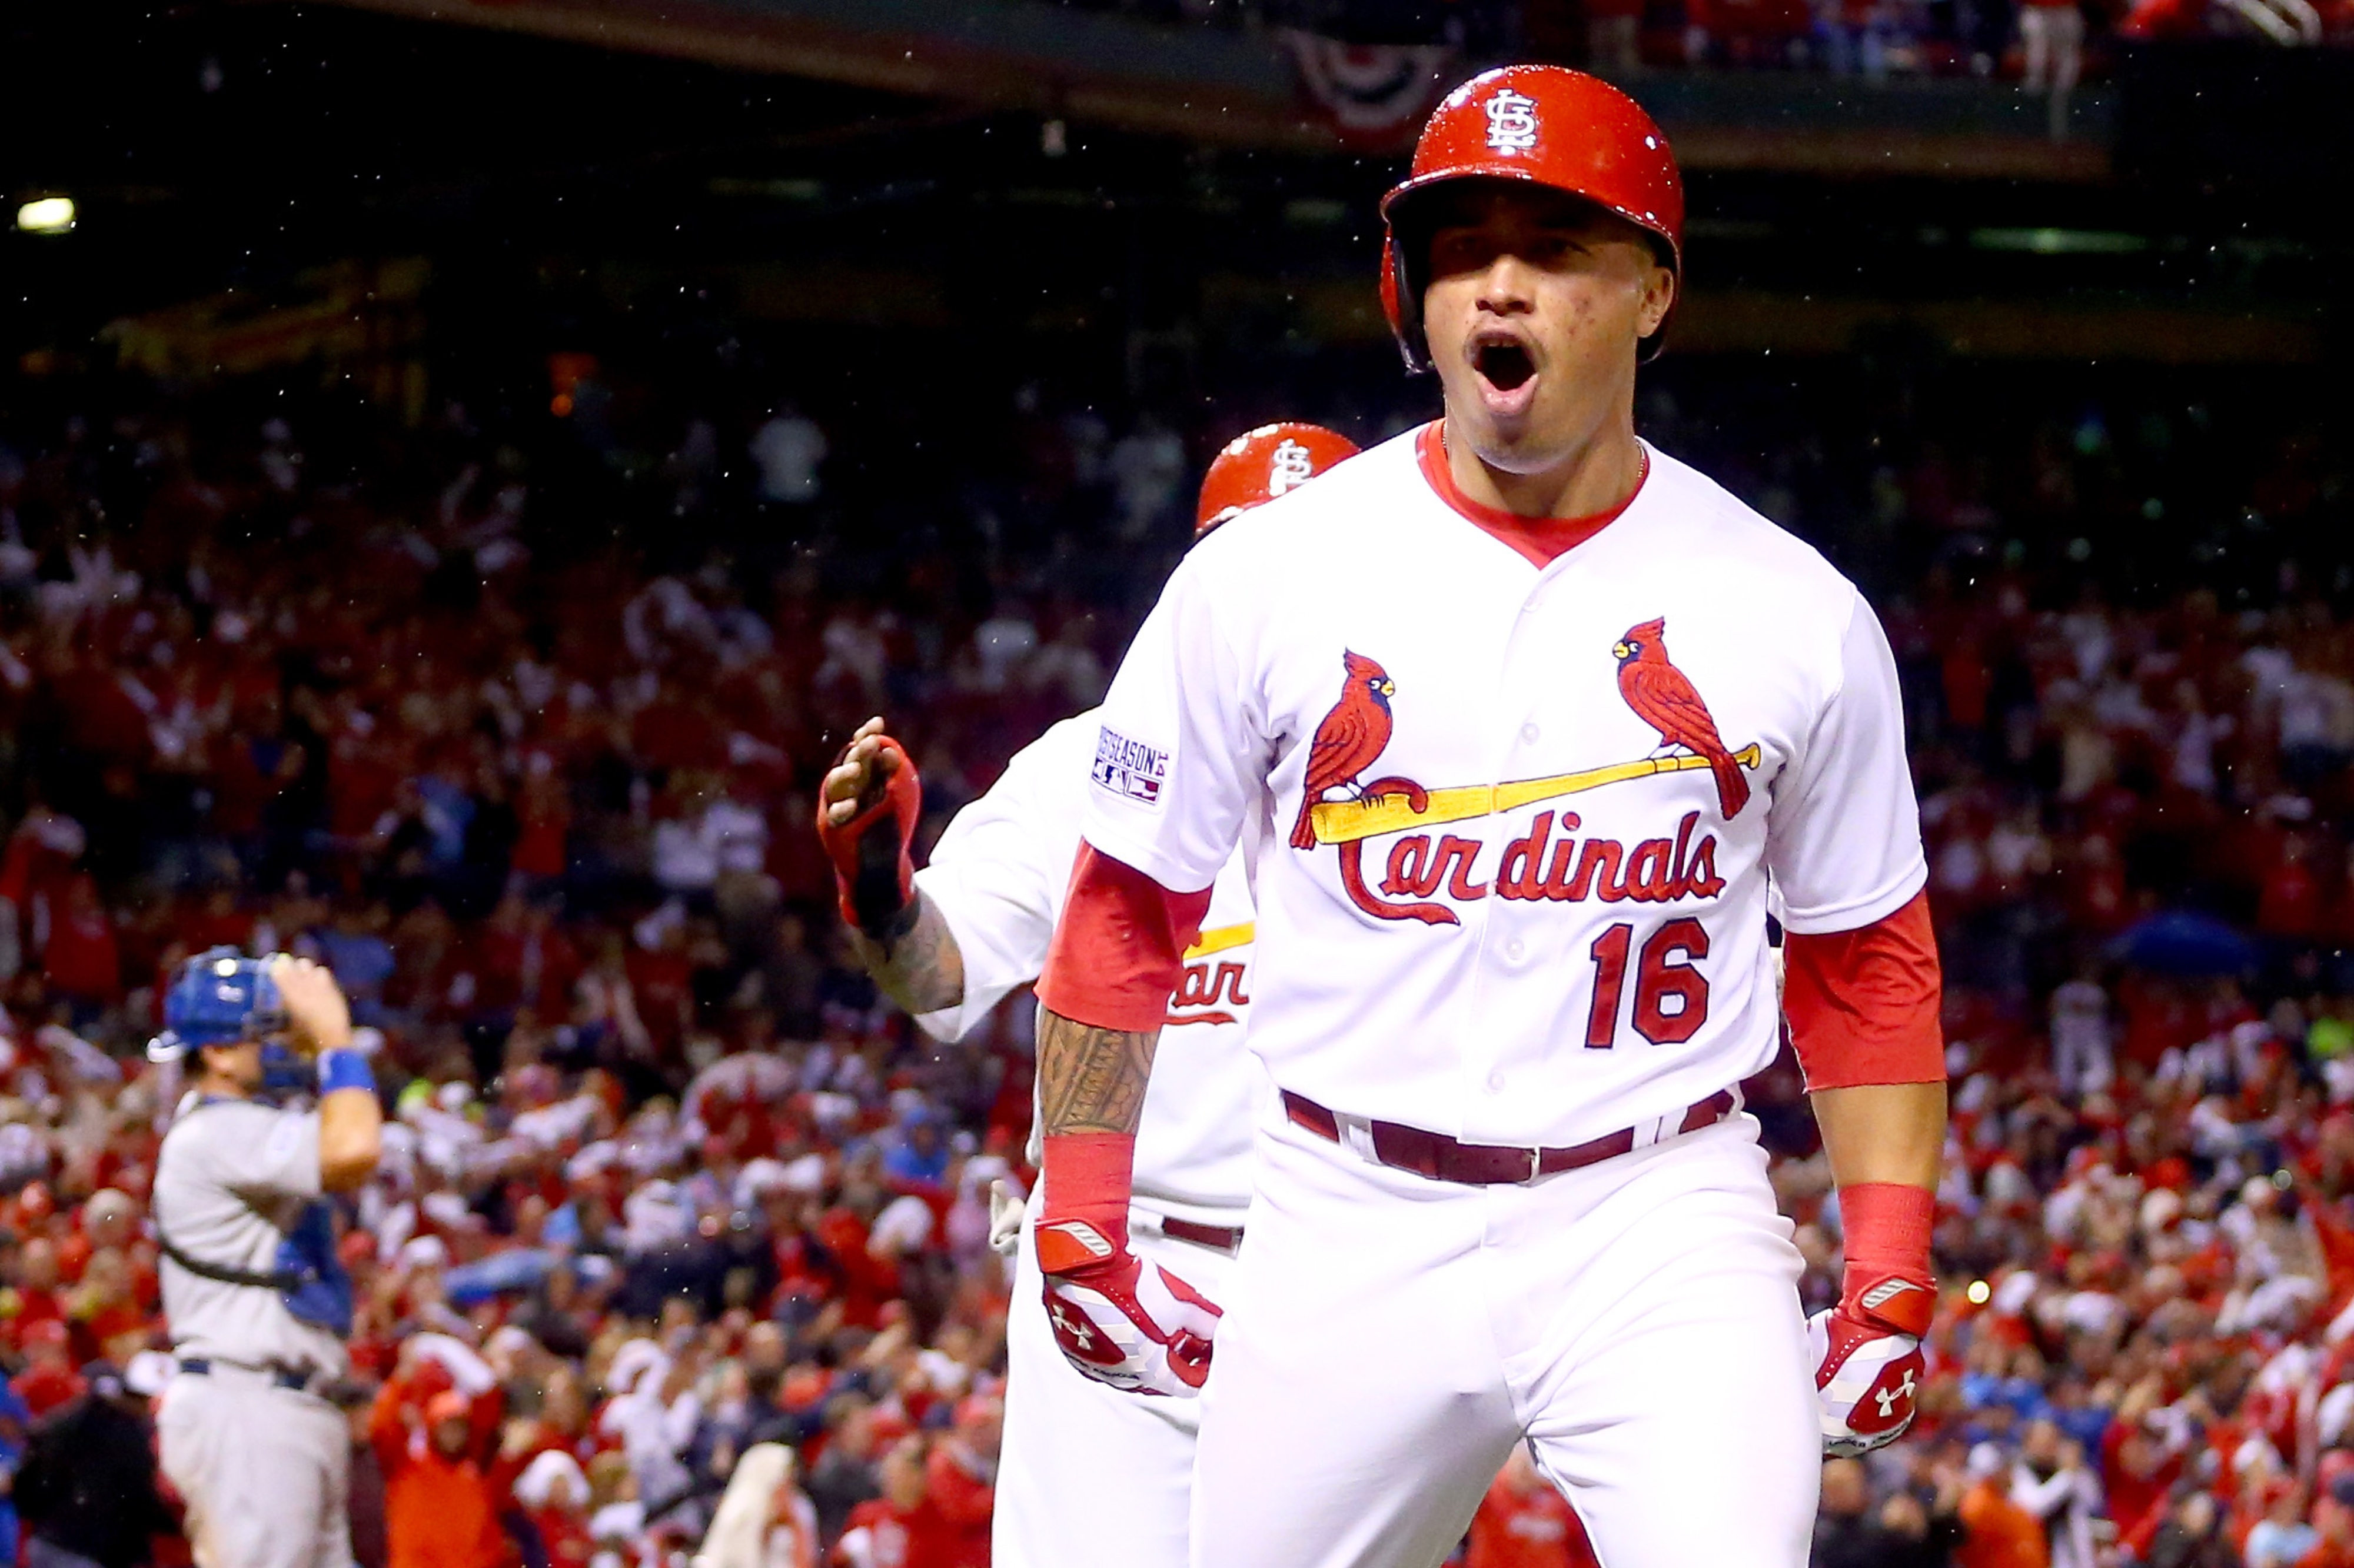 Wong is pumped up after his home run gives the Cardinals the lead